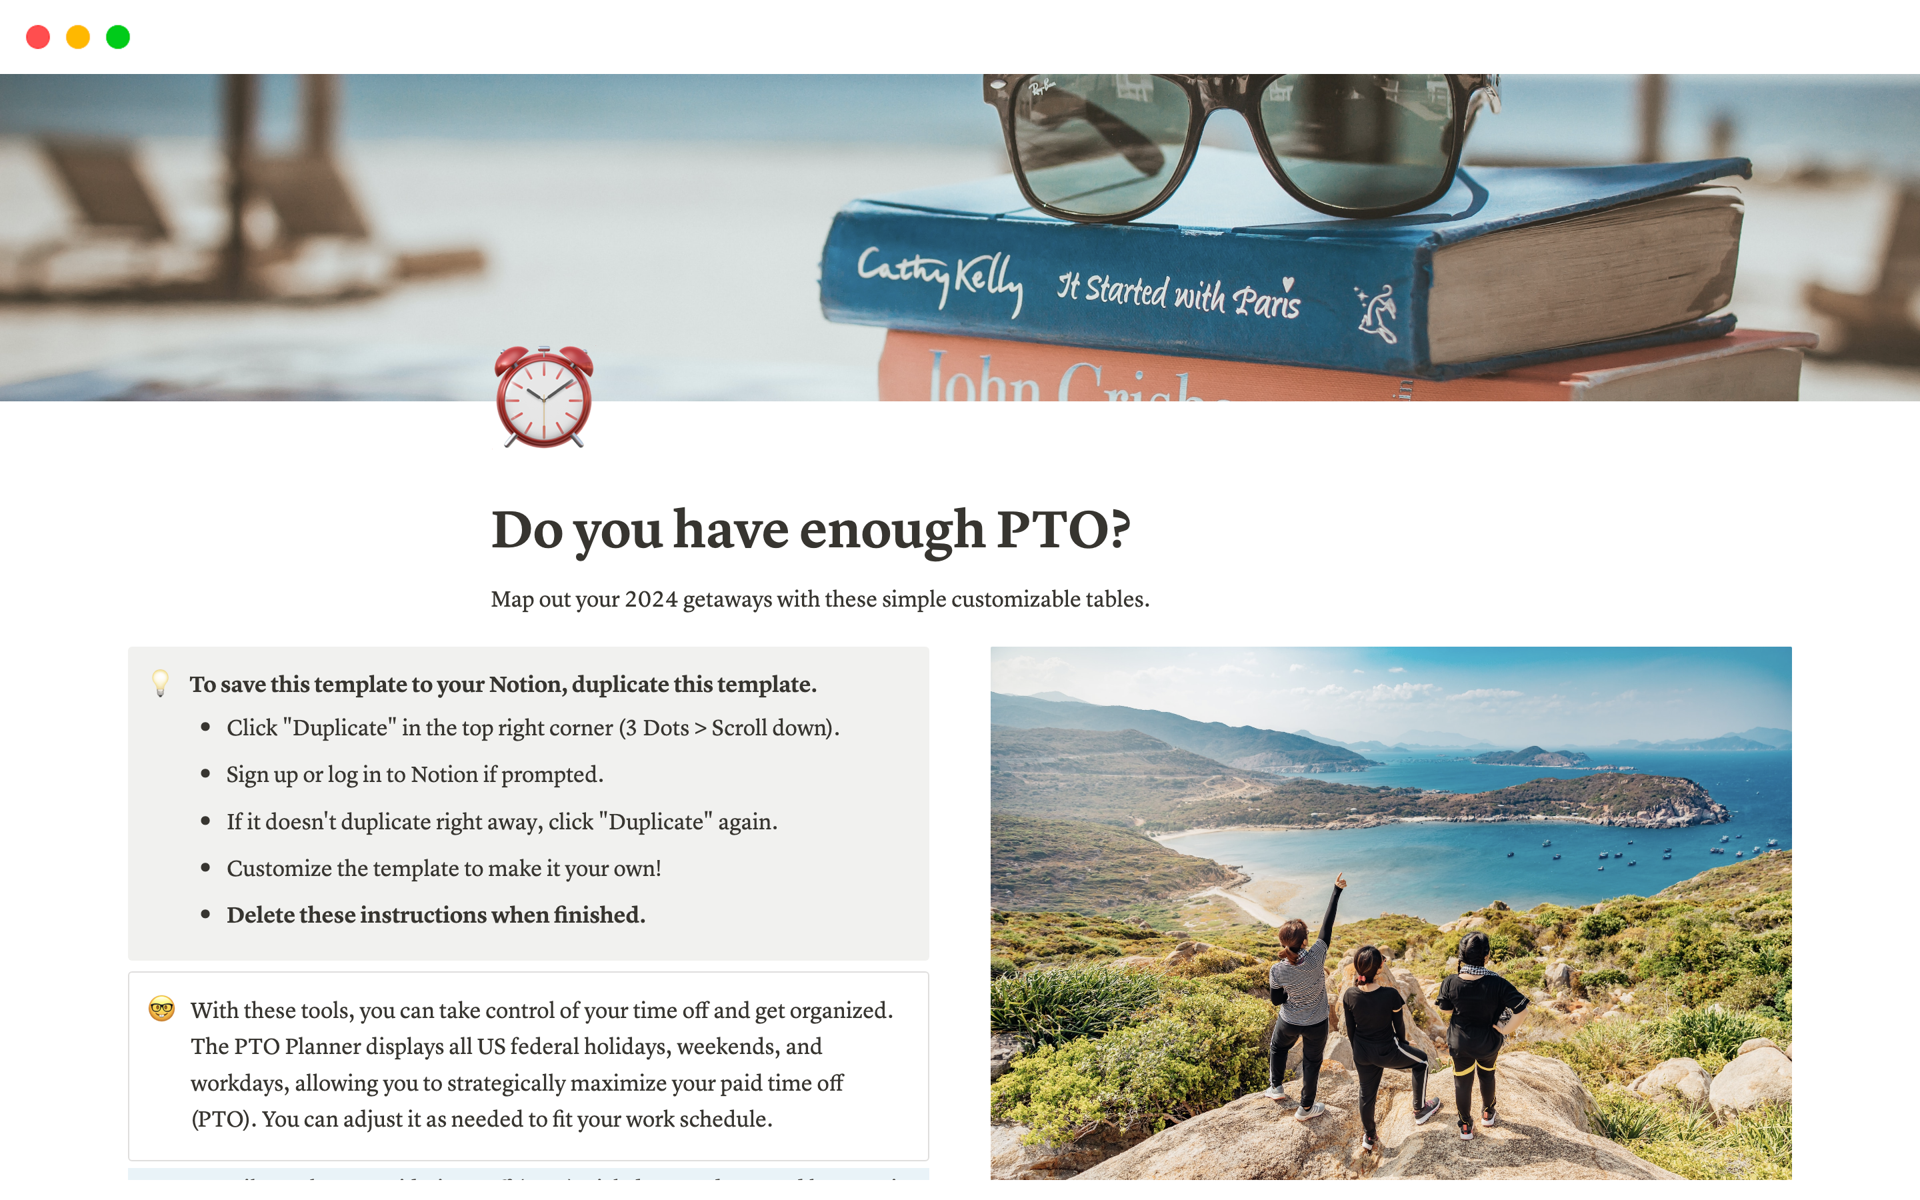 Digital Planner | PTO Planner Template (August 2023 -August 2024 w/ U.S. Federal Holidays) You can now plan ahead and keep track of your PTO hours, holidays, and mental health days with ease.